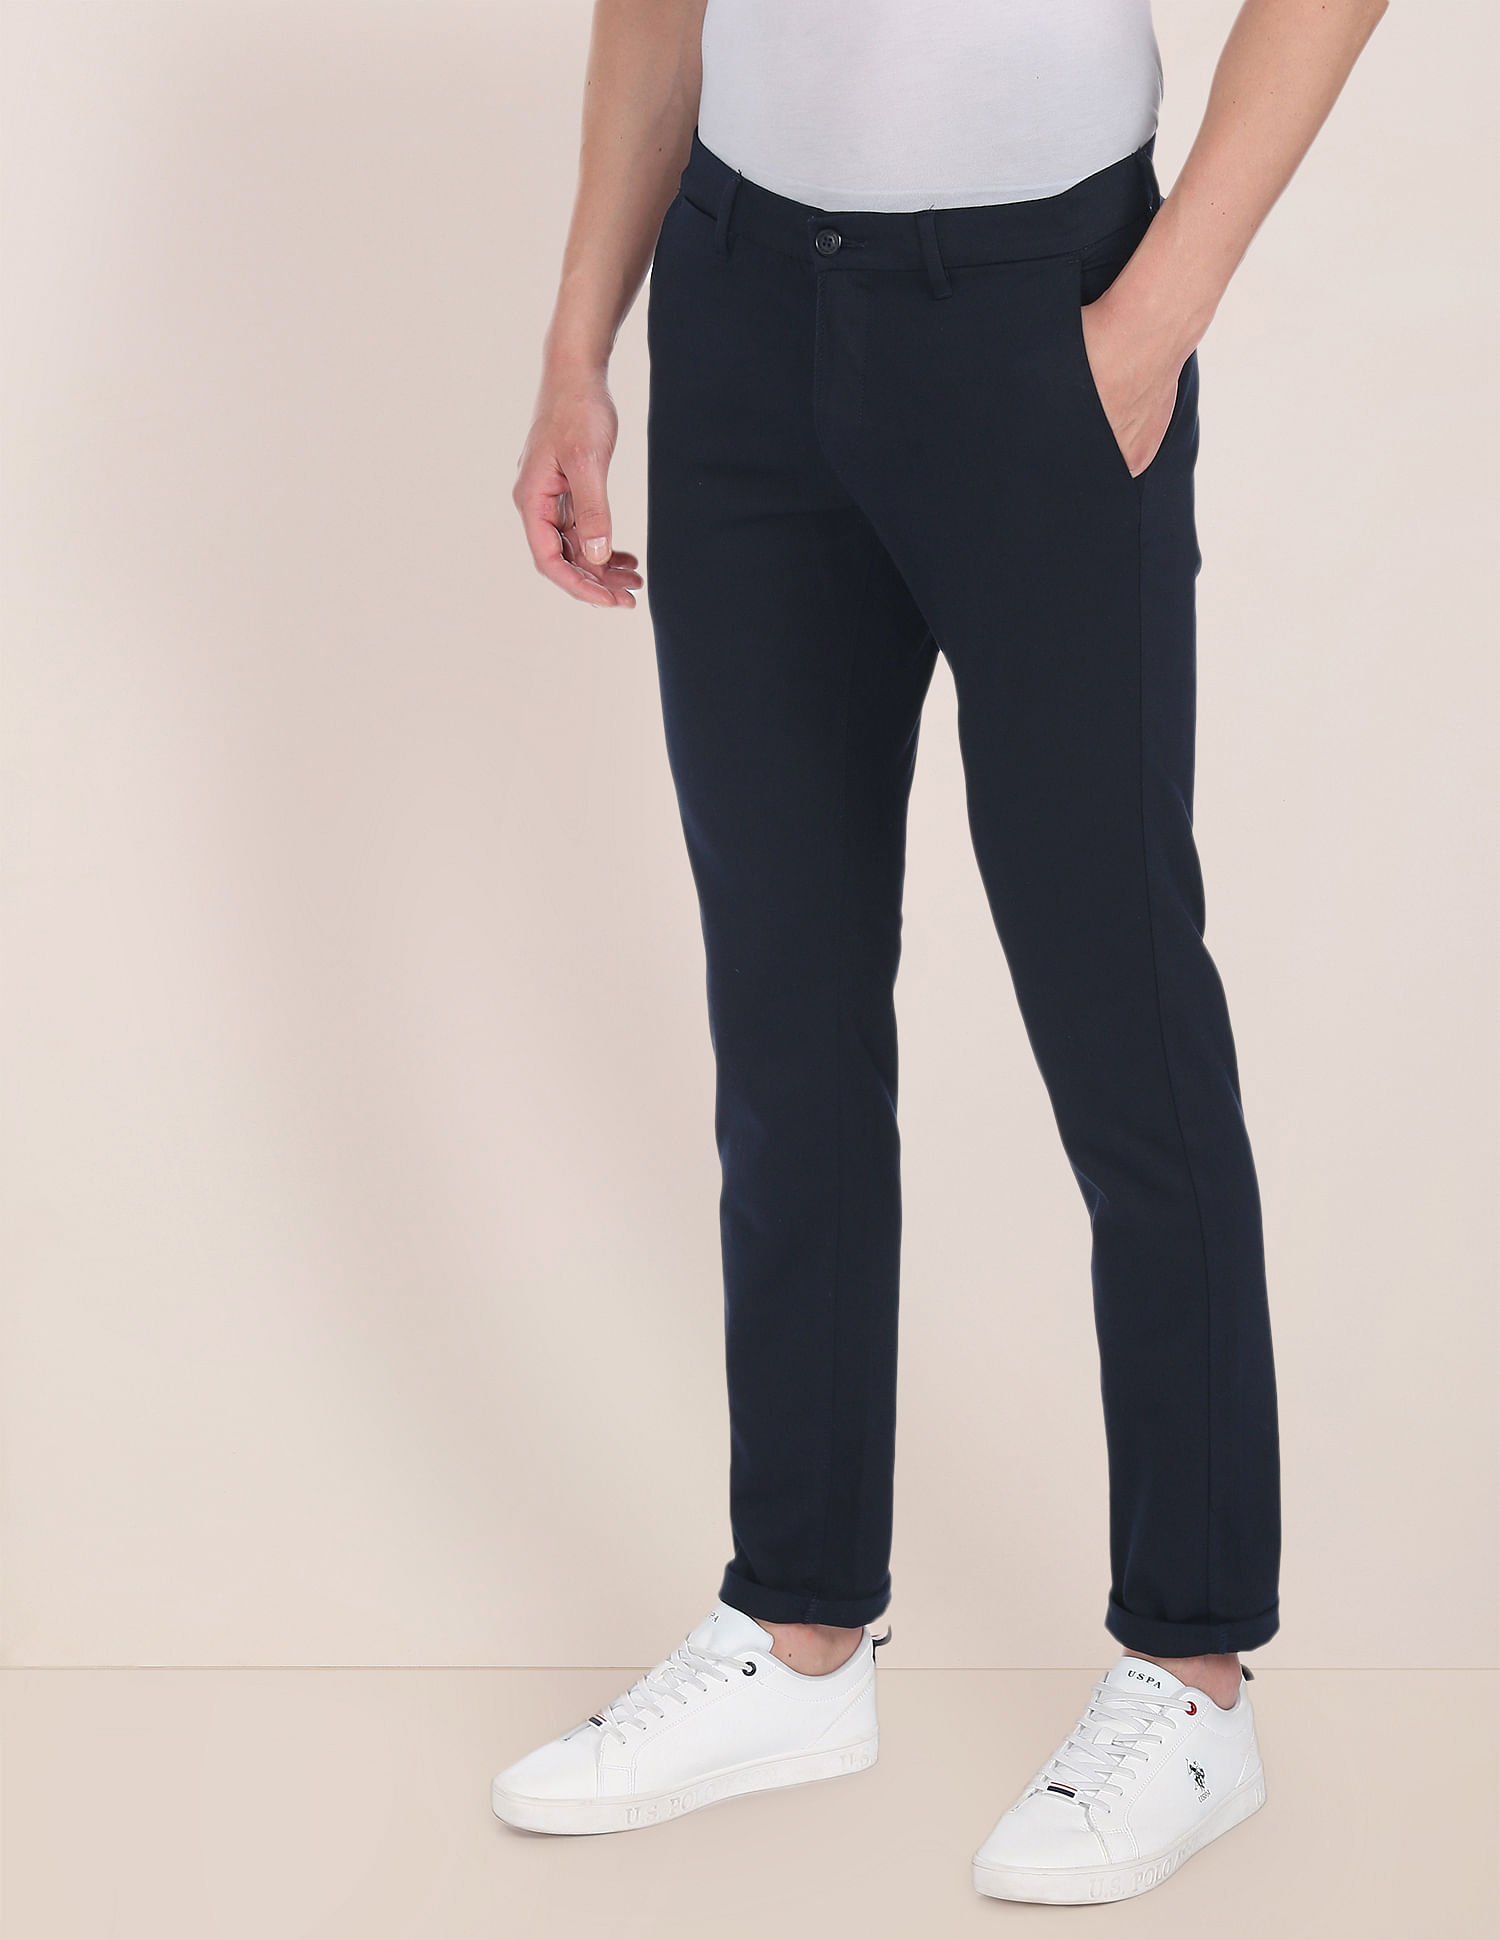 US POLO ASSN Casual Trousers  Buy US POLO ASSN Mid Rise Dobby Casual Trouser  Online  Nykaa Fashion